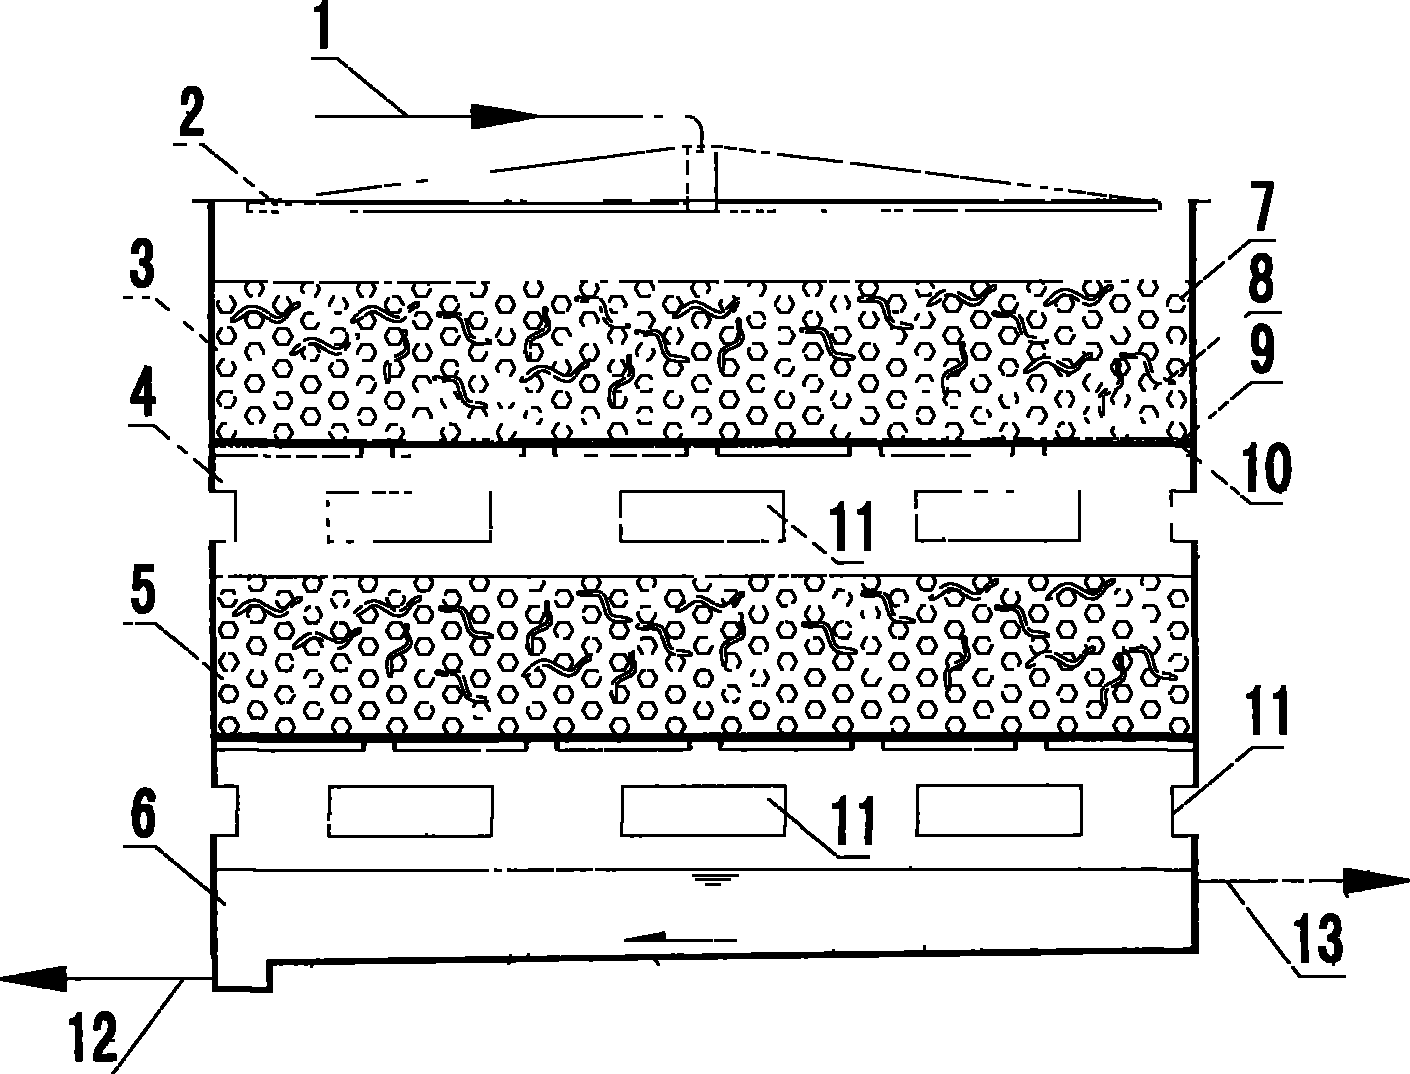 Method for treating rural disperse sewage by using high load vermibiofilter